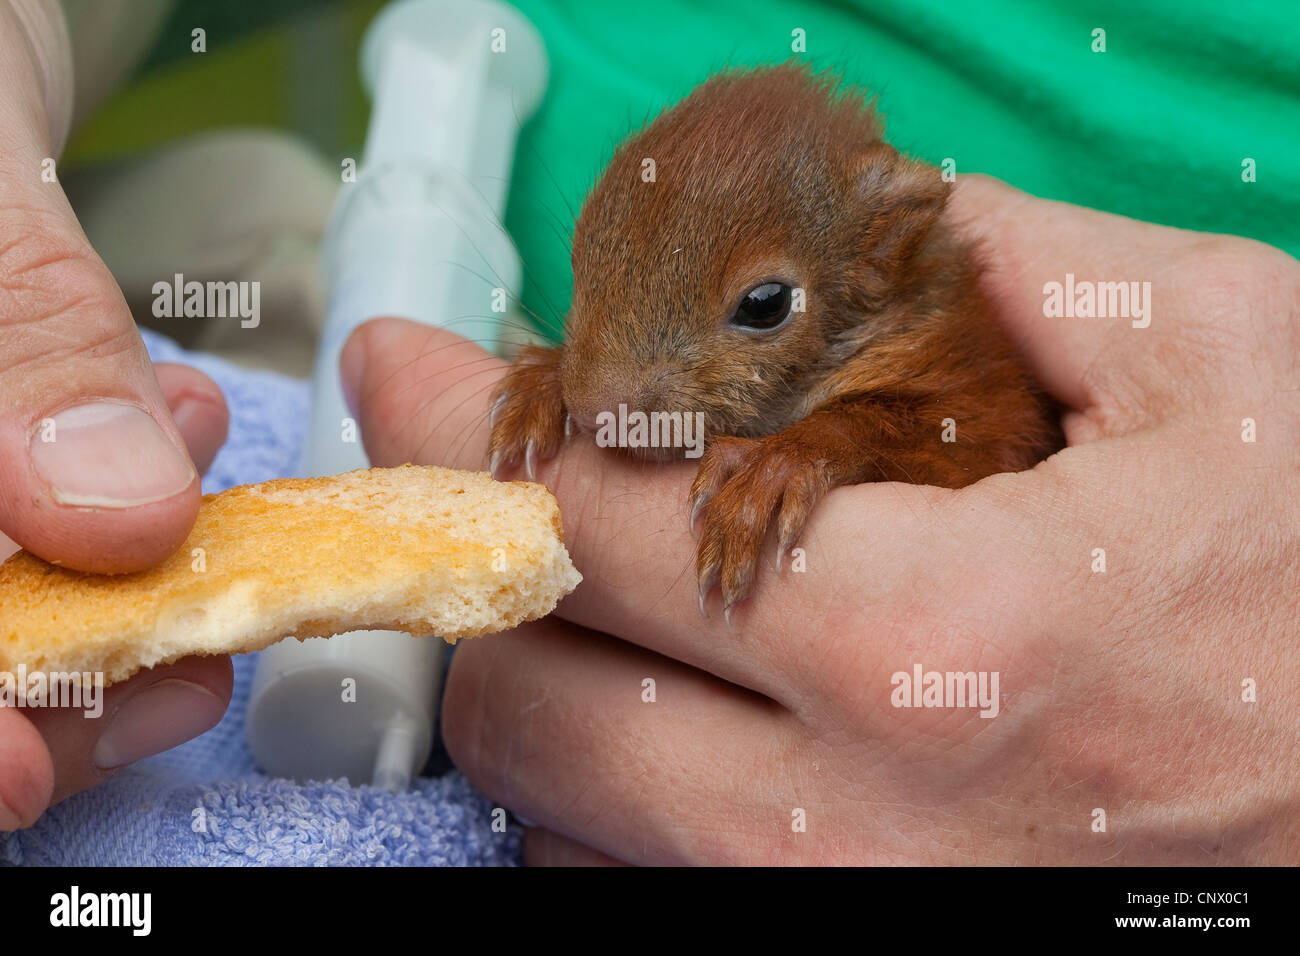 European red squirrel, Eurasian red squirrel (Sciurus vulgaris), orphaned pup in a hand feeding on a zwieback, Germany Stock Photo